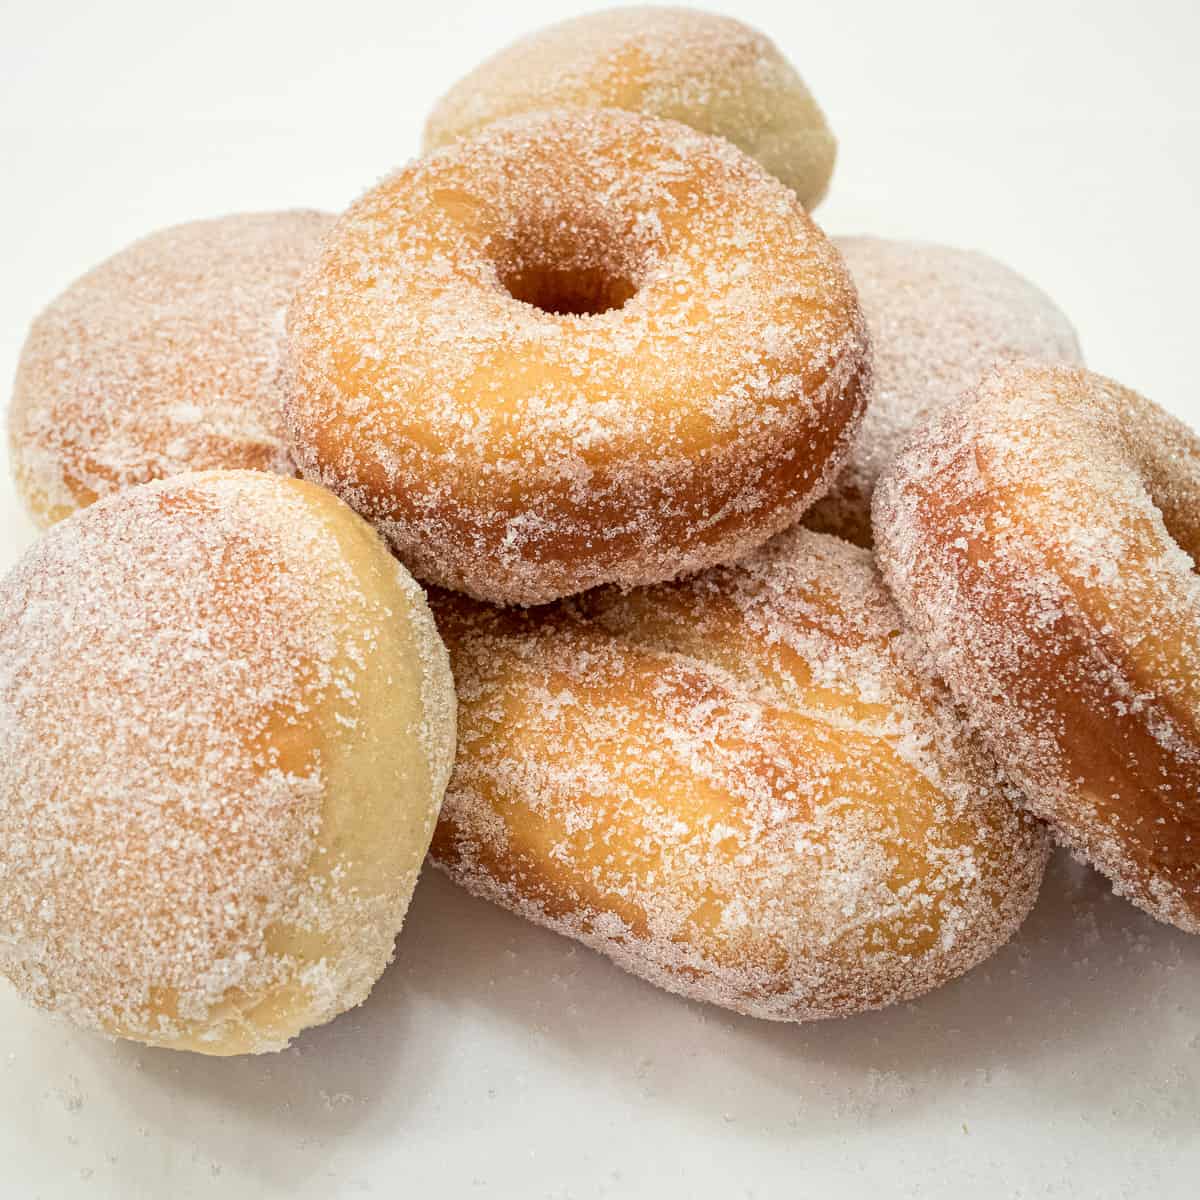 Baked or Fried Doughnuts